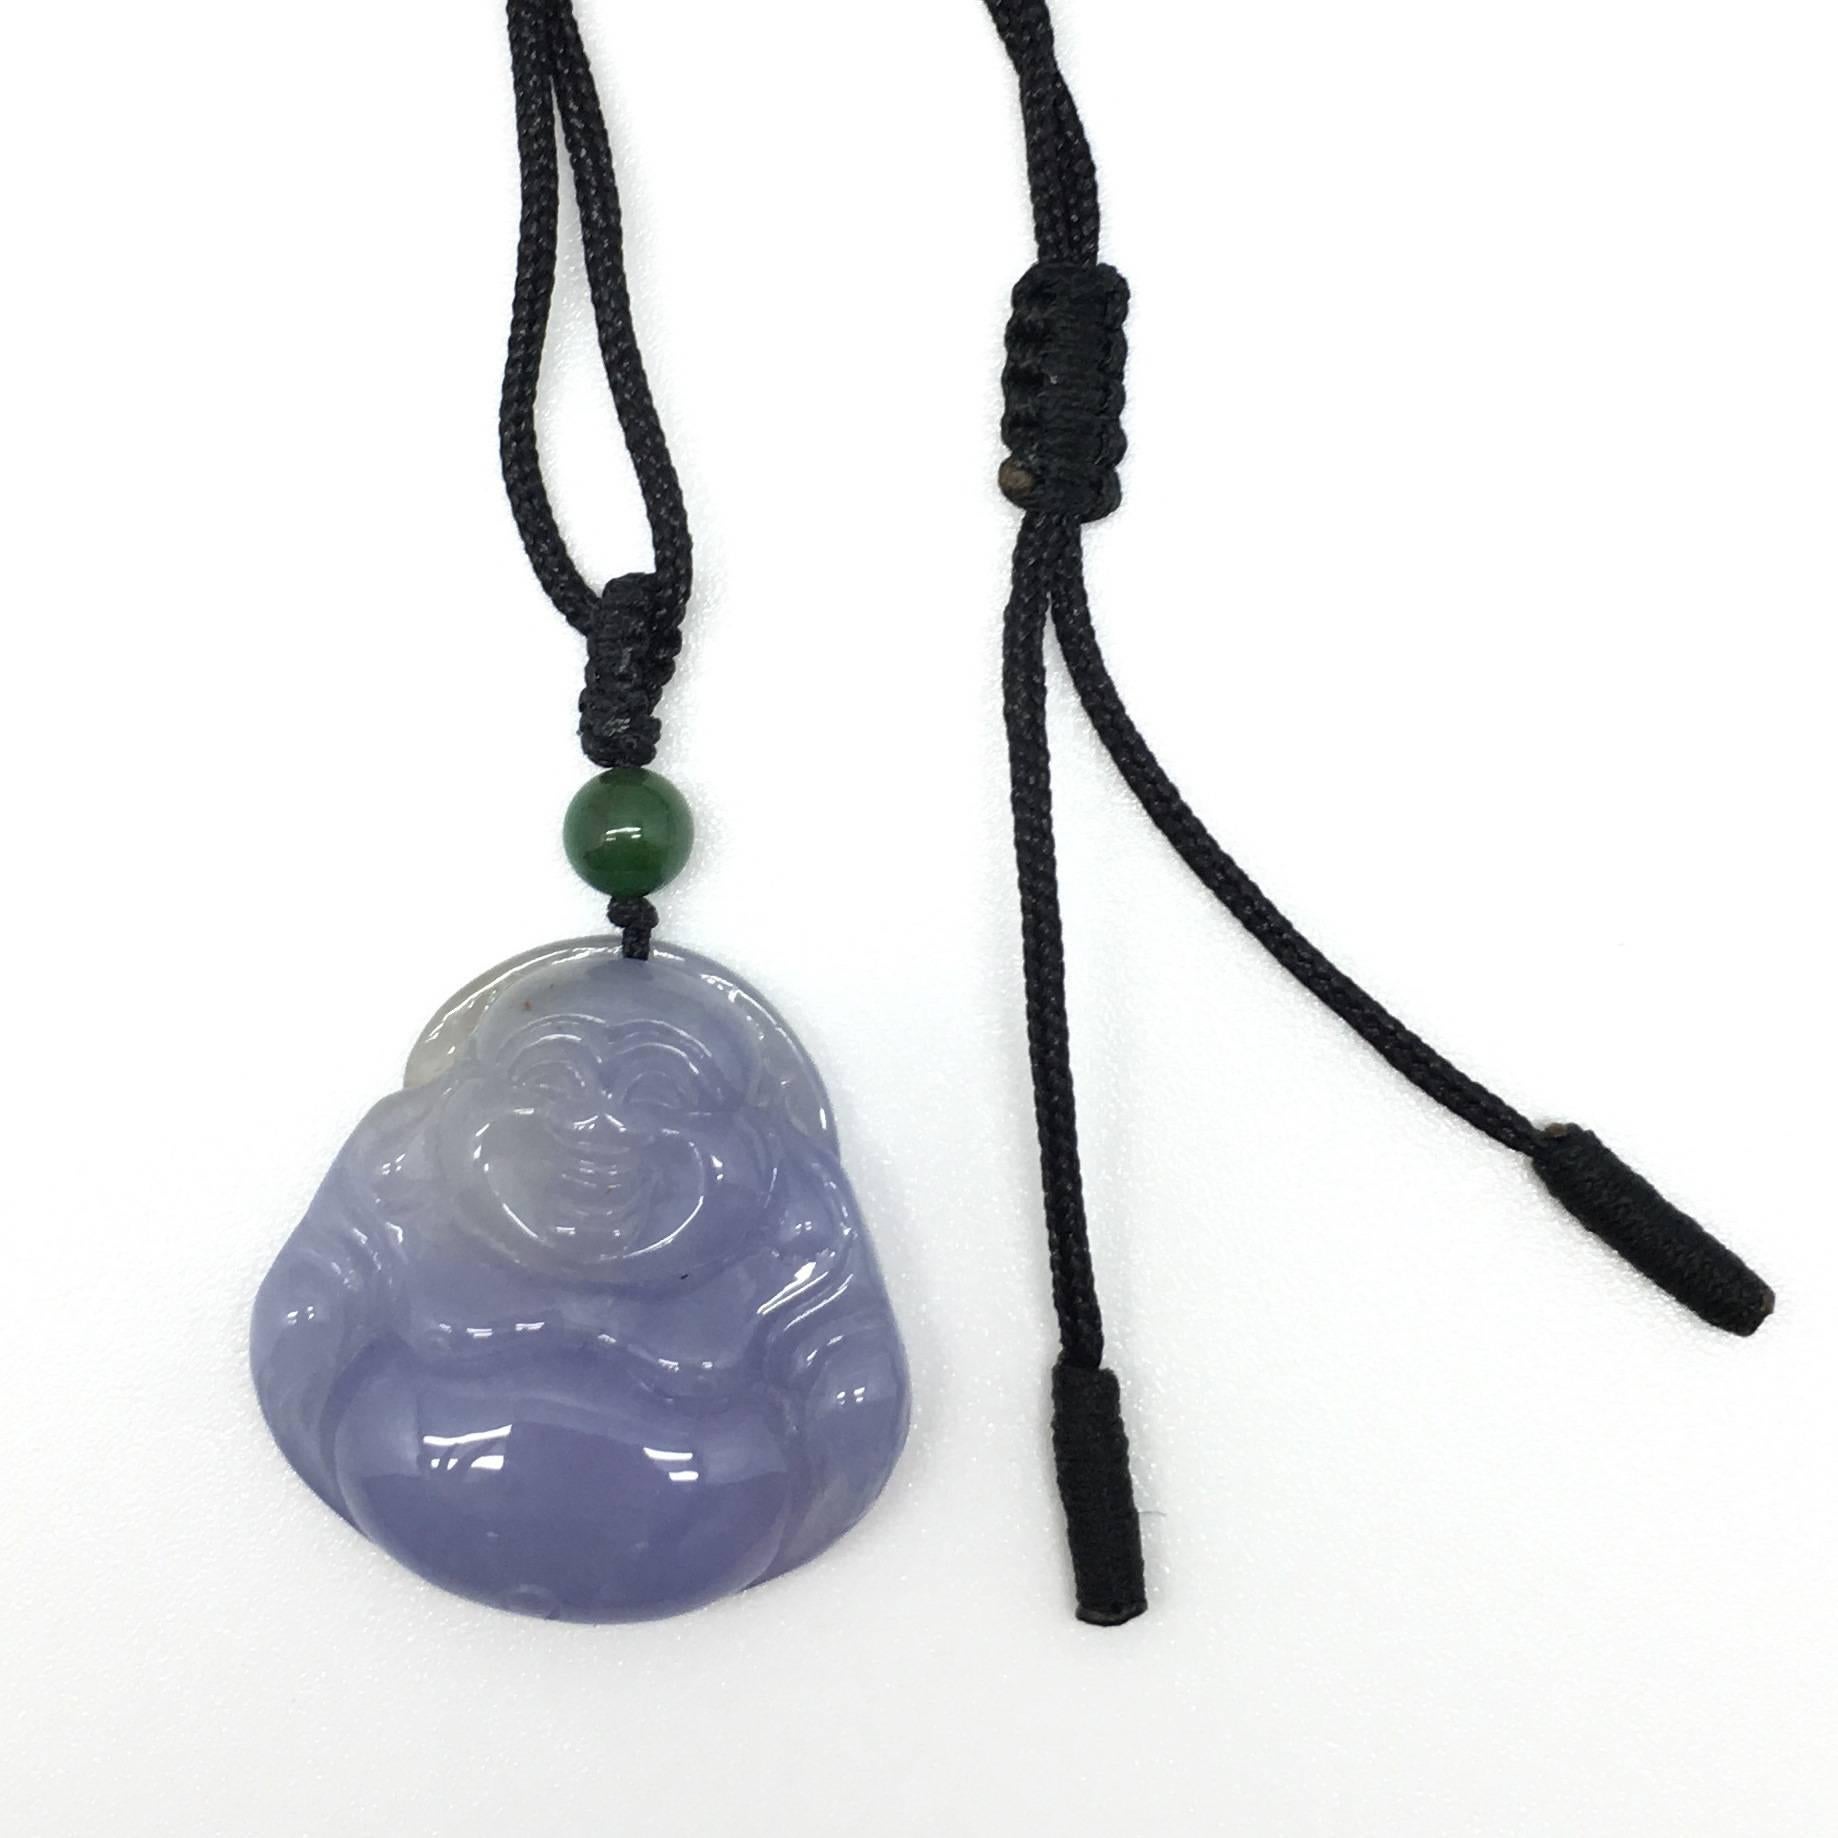 GILIN Carved Natural Lavender Jadeite Jade 'Fo' Pendant with Black Cord 1